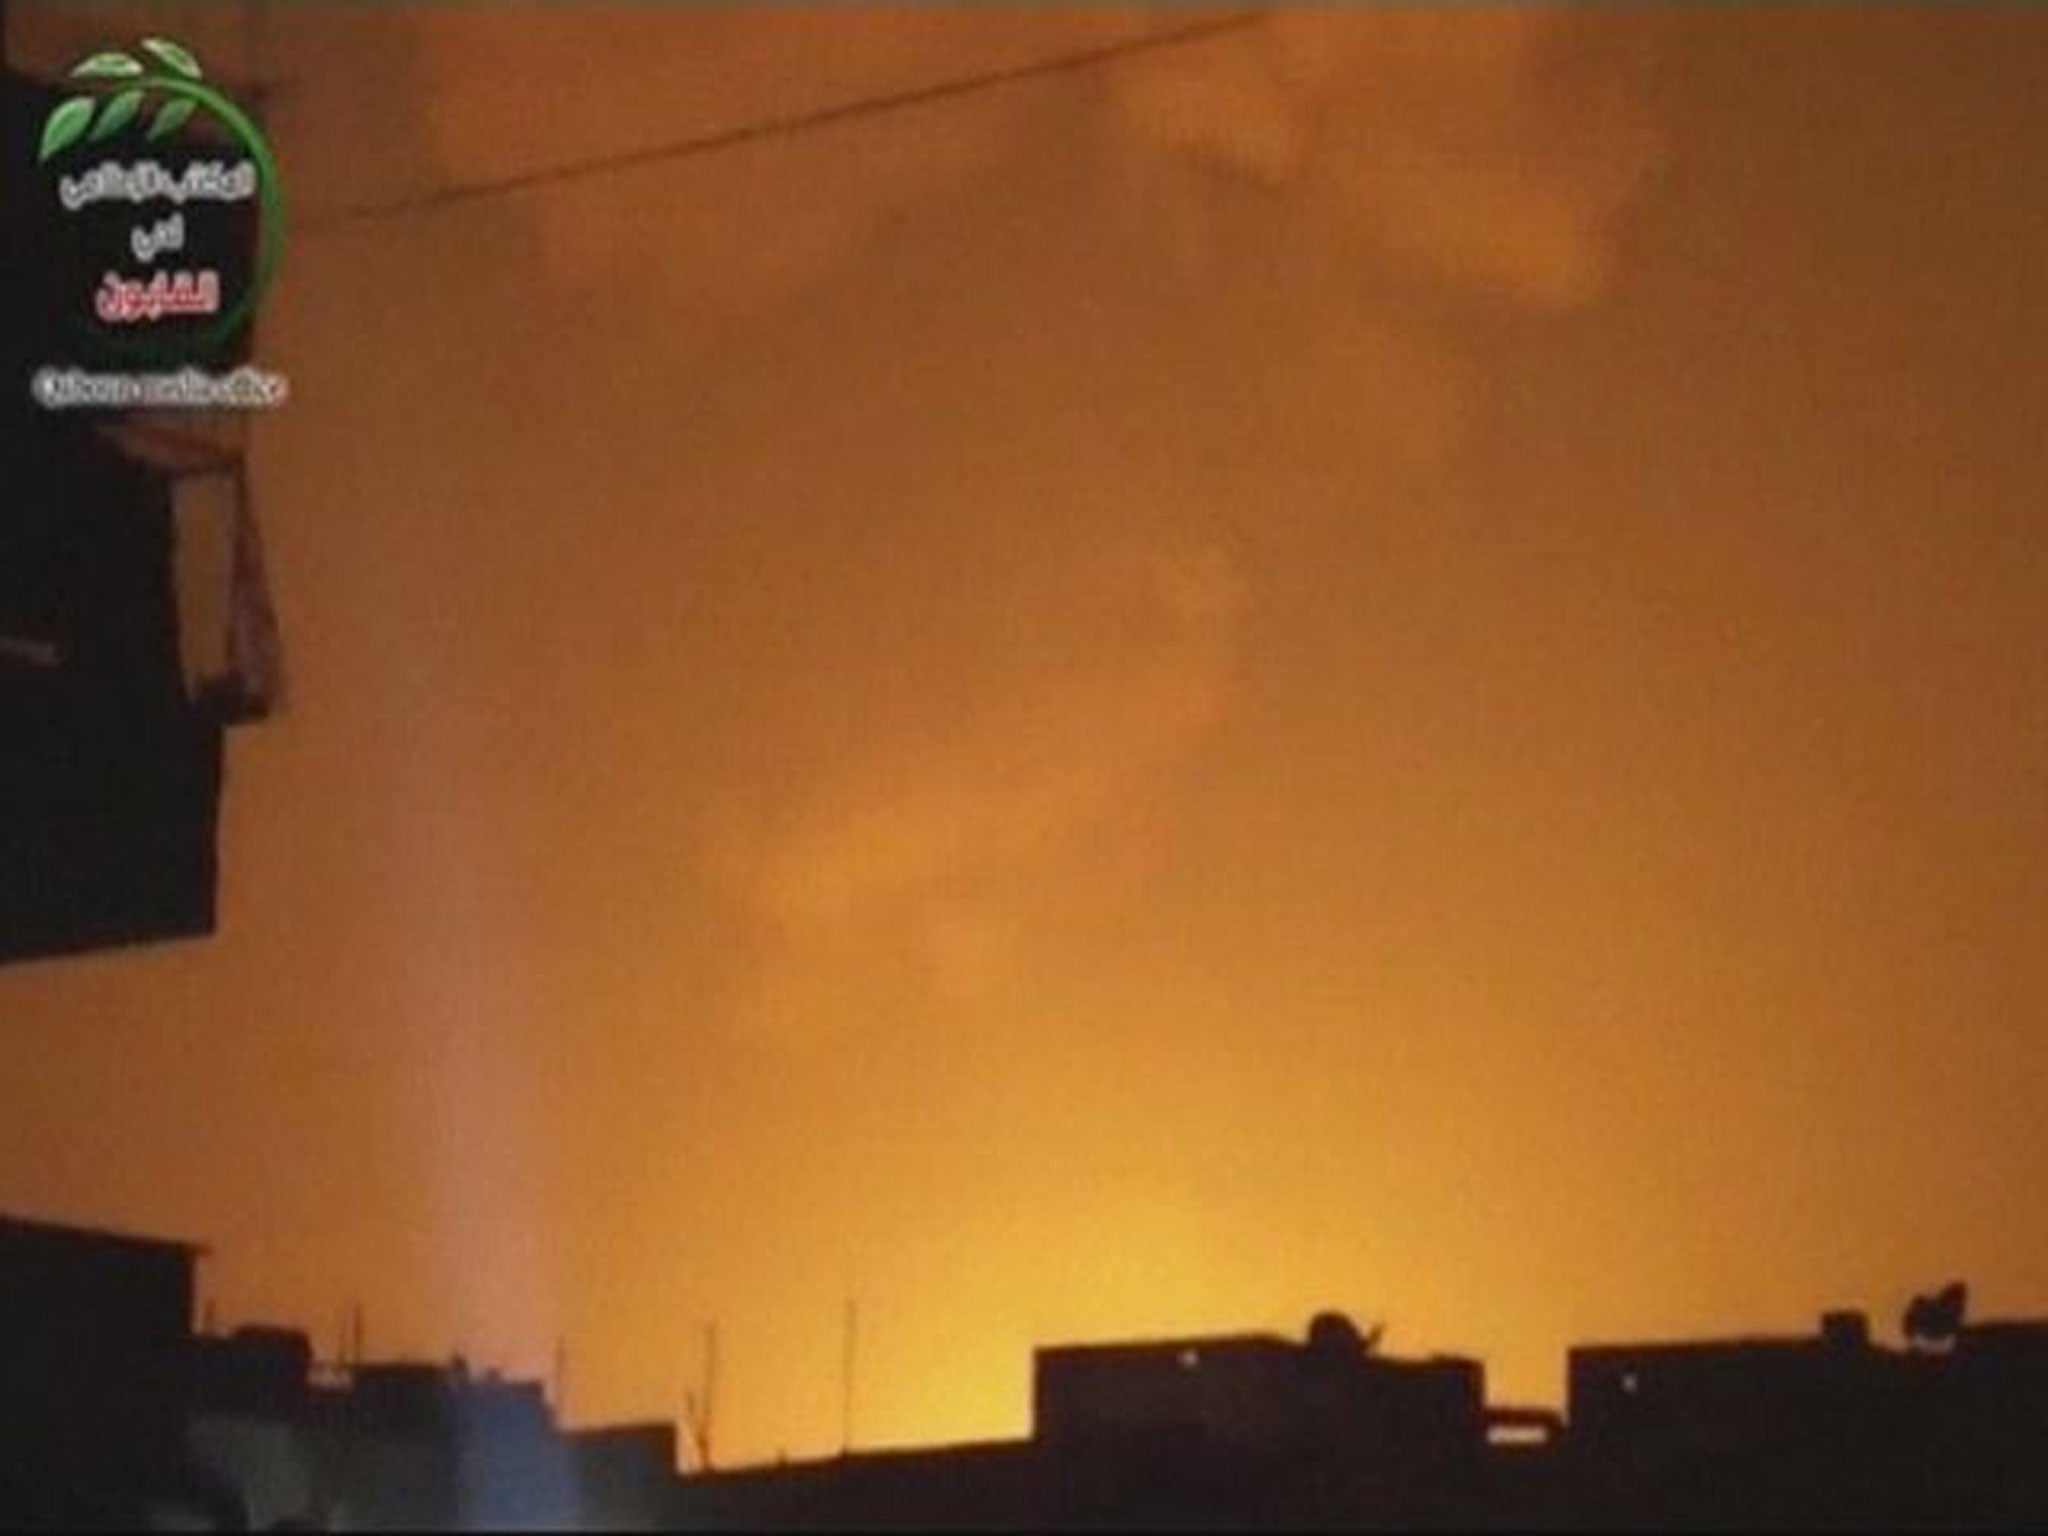 A still from an unverified video which claims to show sky lit up by an attack on a military research centre in Damascus